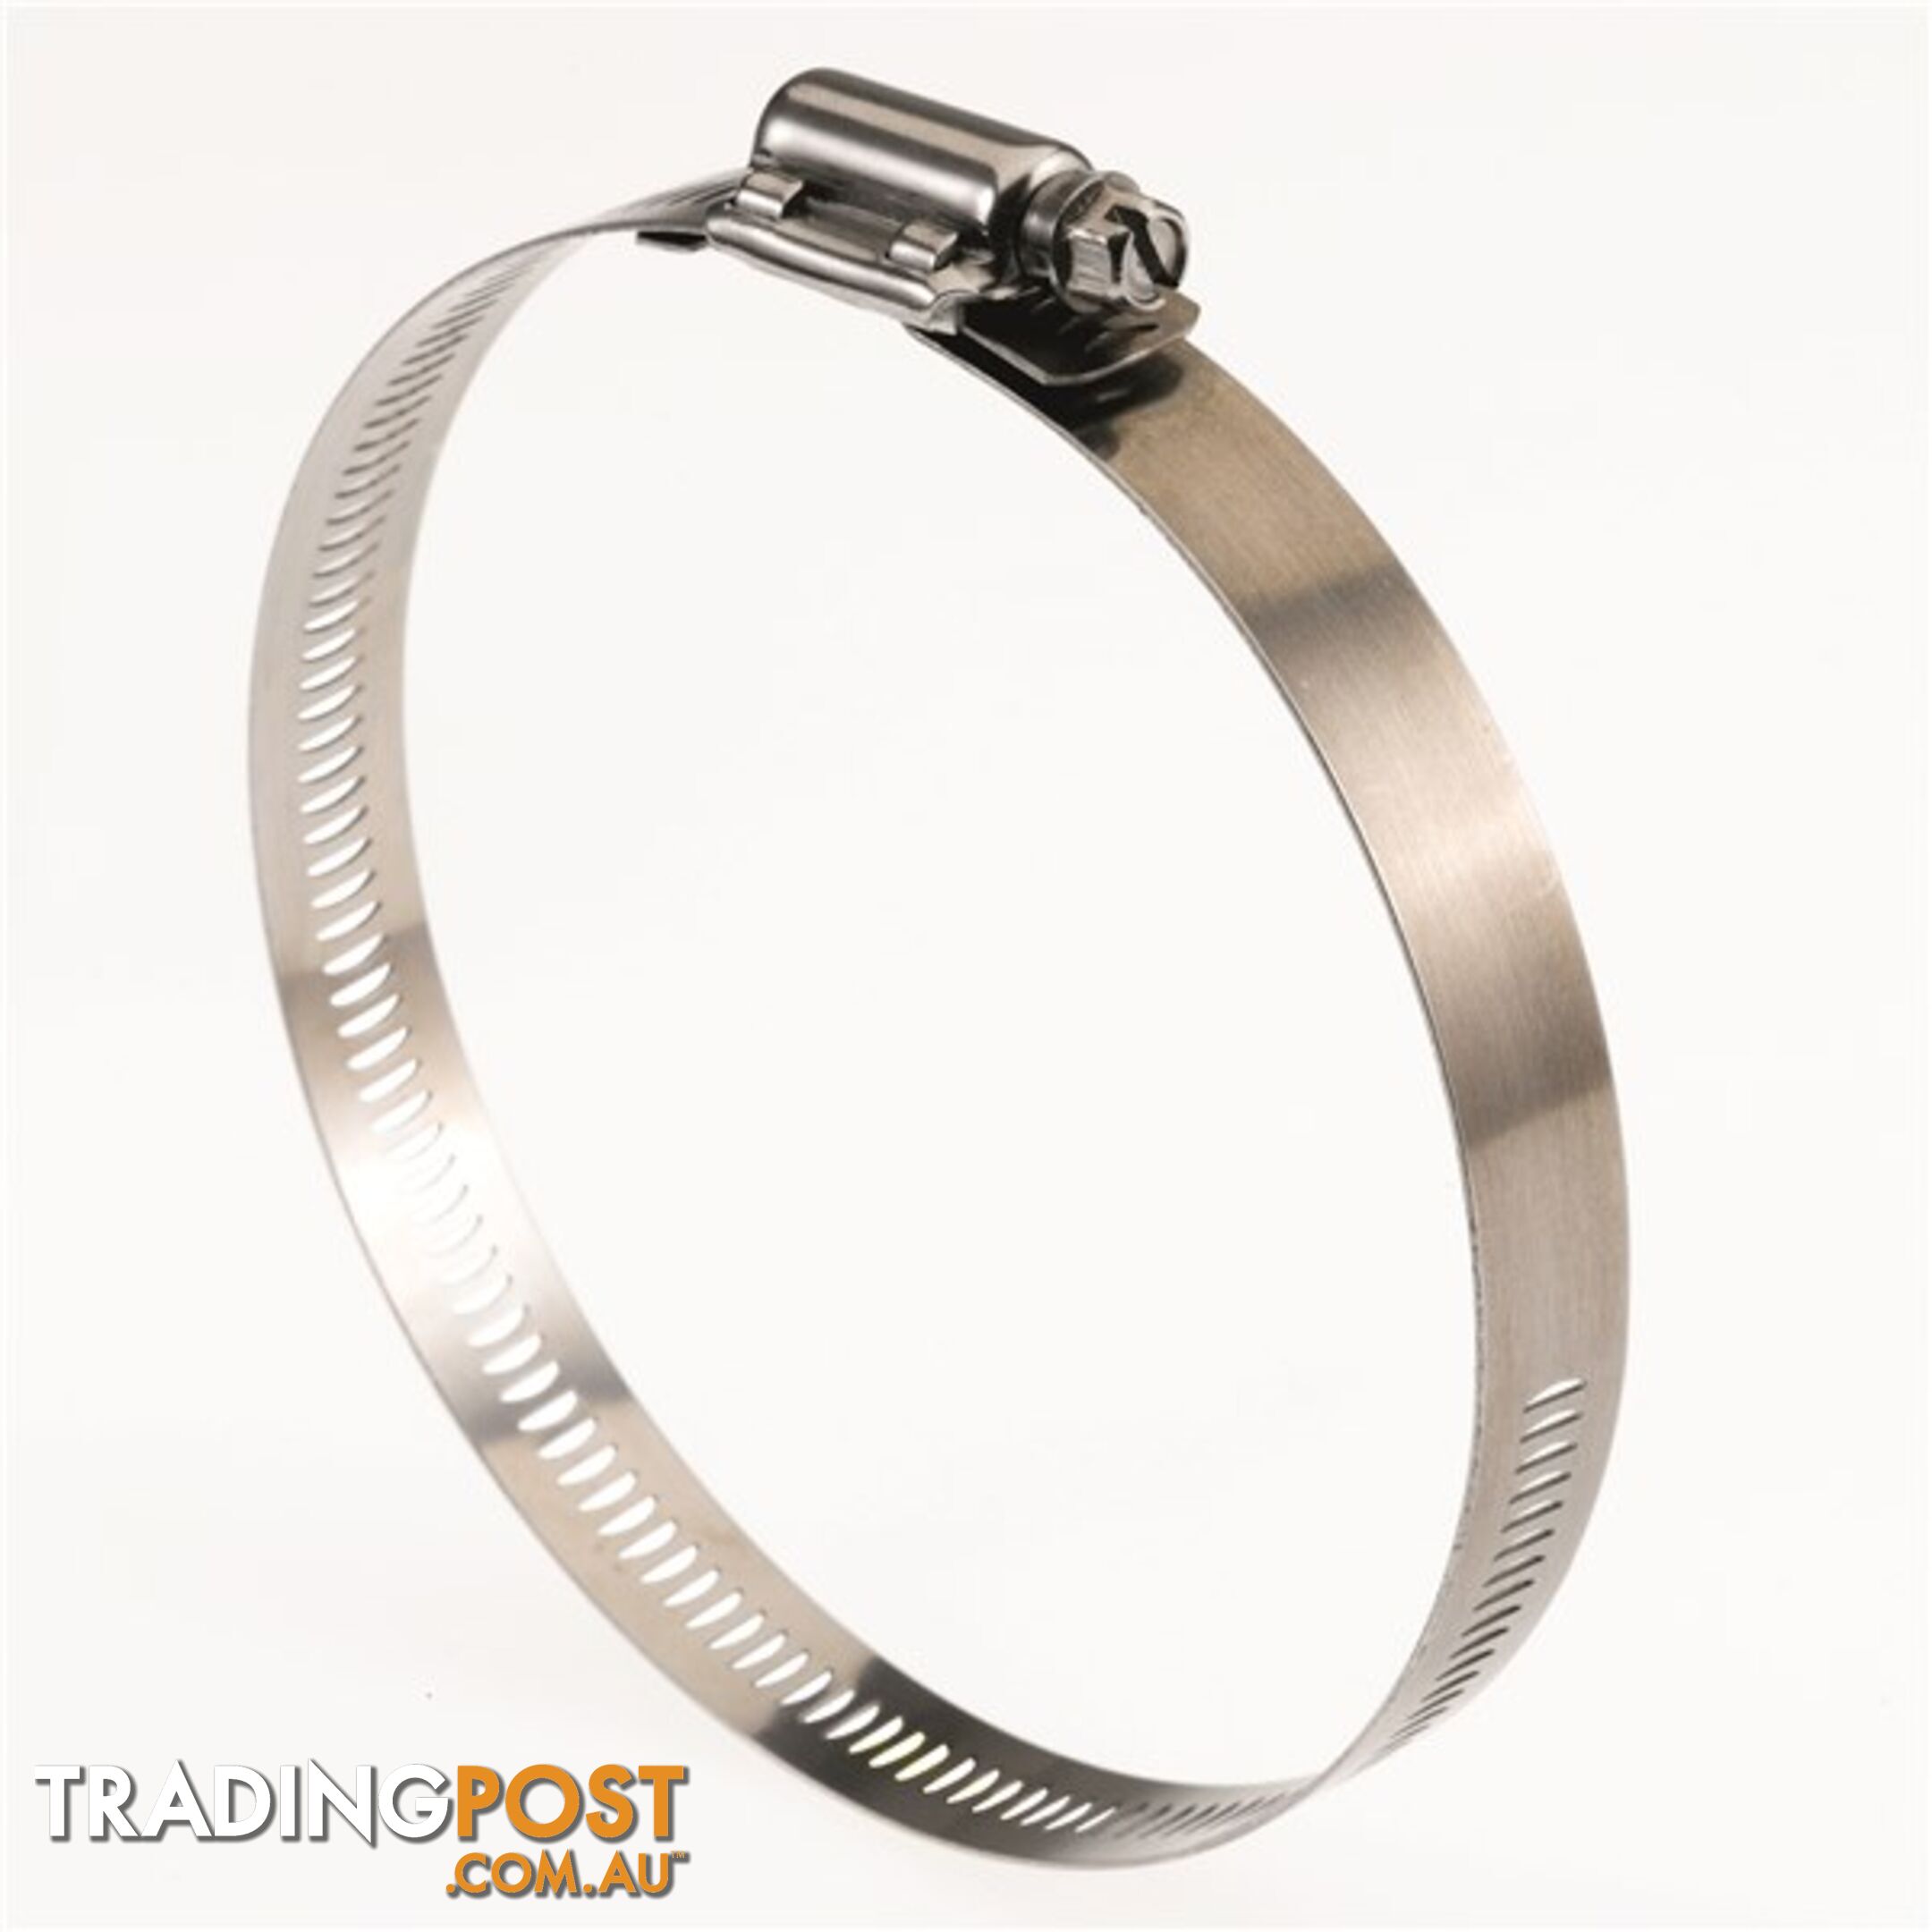 Tridon Tri-Strength Clamp Stainless Steel Perforated 91mm  - 114mm 10pk SKU - TS114P